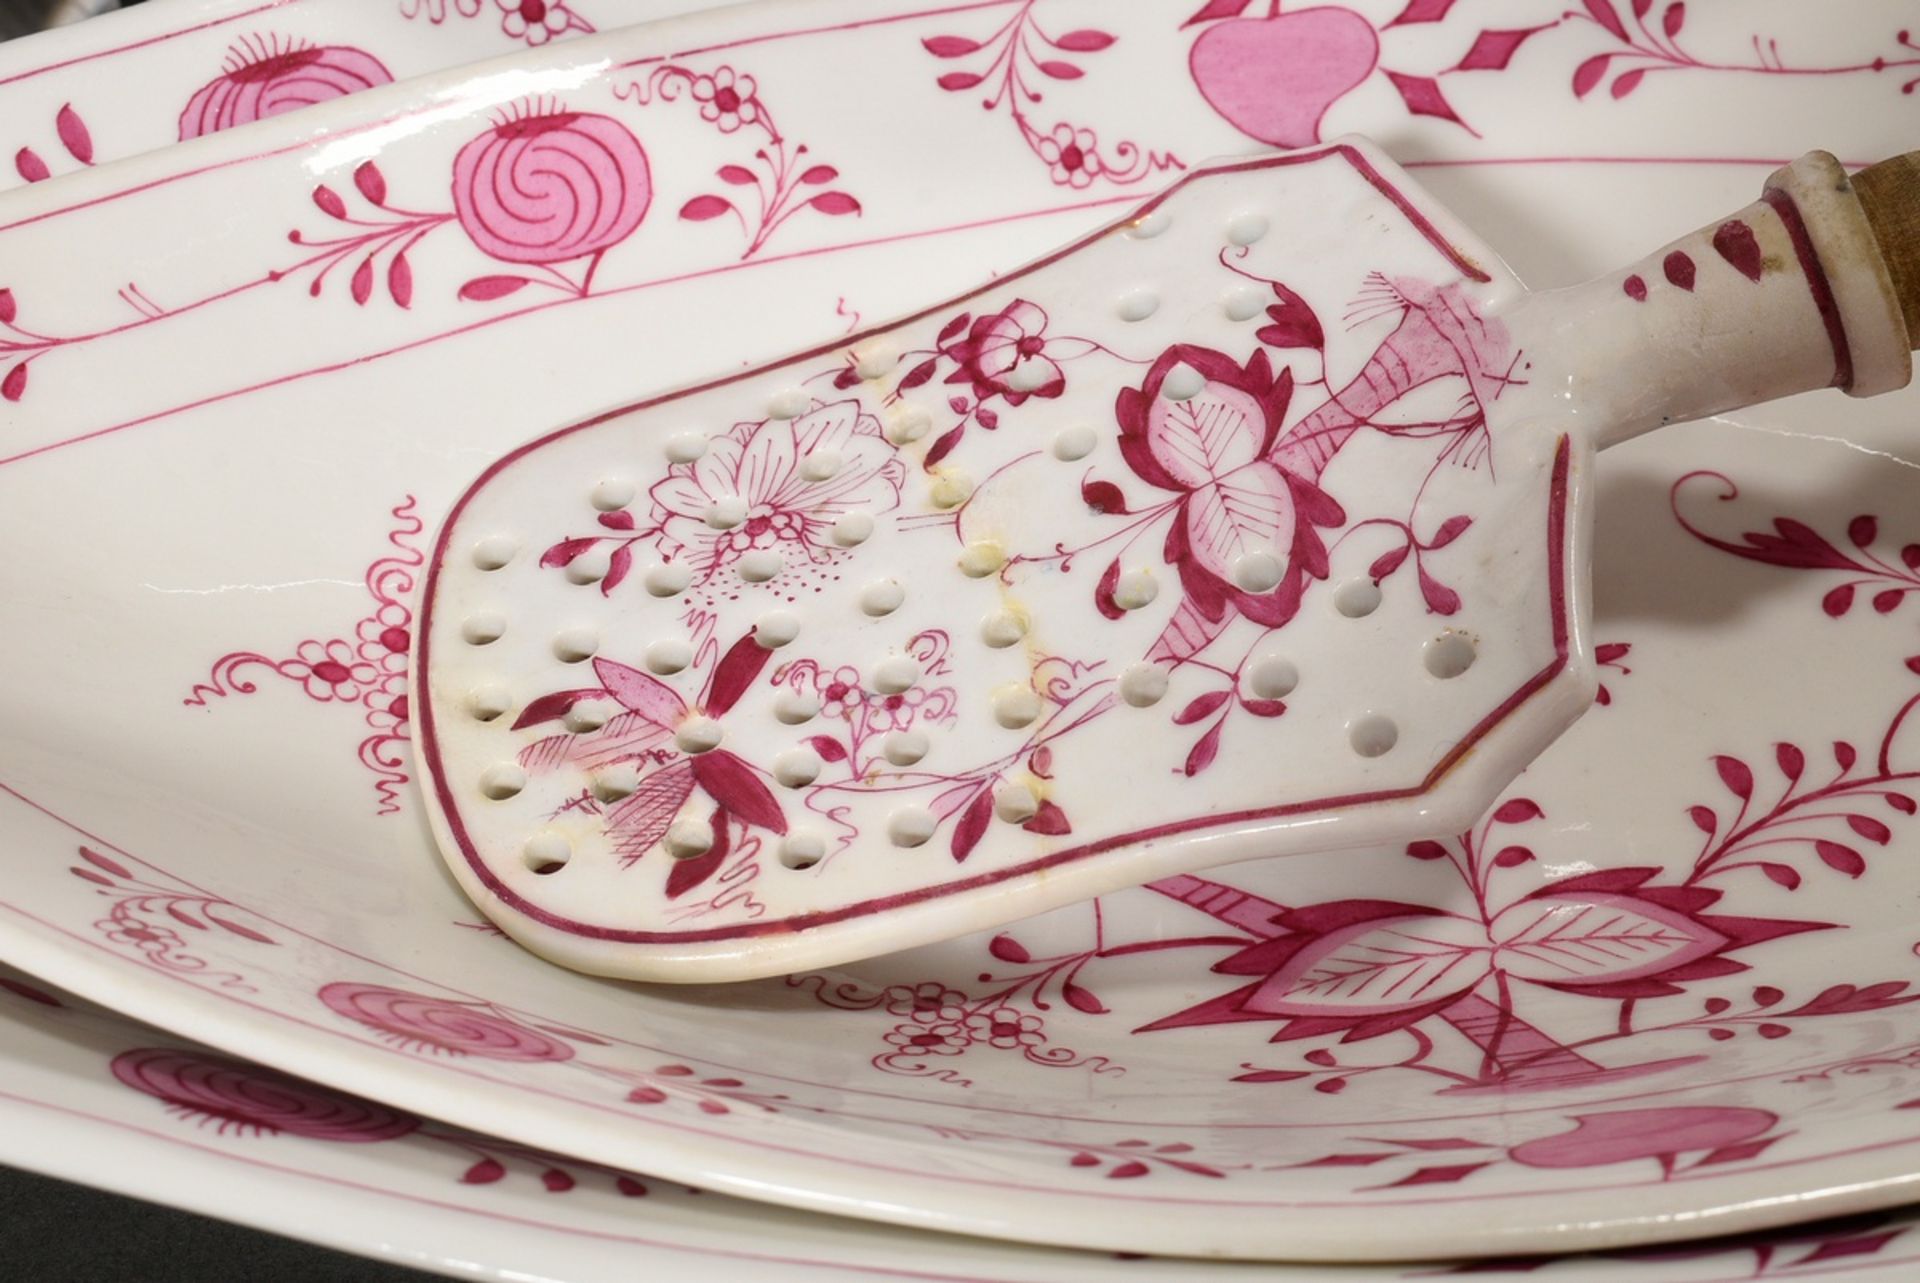 65 Pieces rare Meissen dinner service "Zwiebelmuster Pink", custom made around 1900, consisting of: - Image 14 of 27